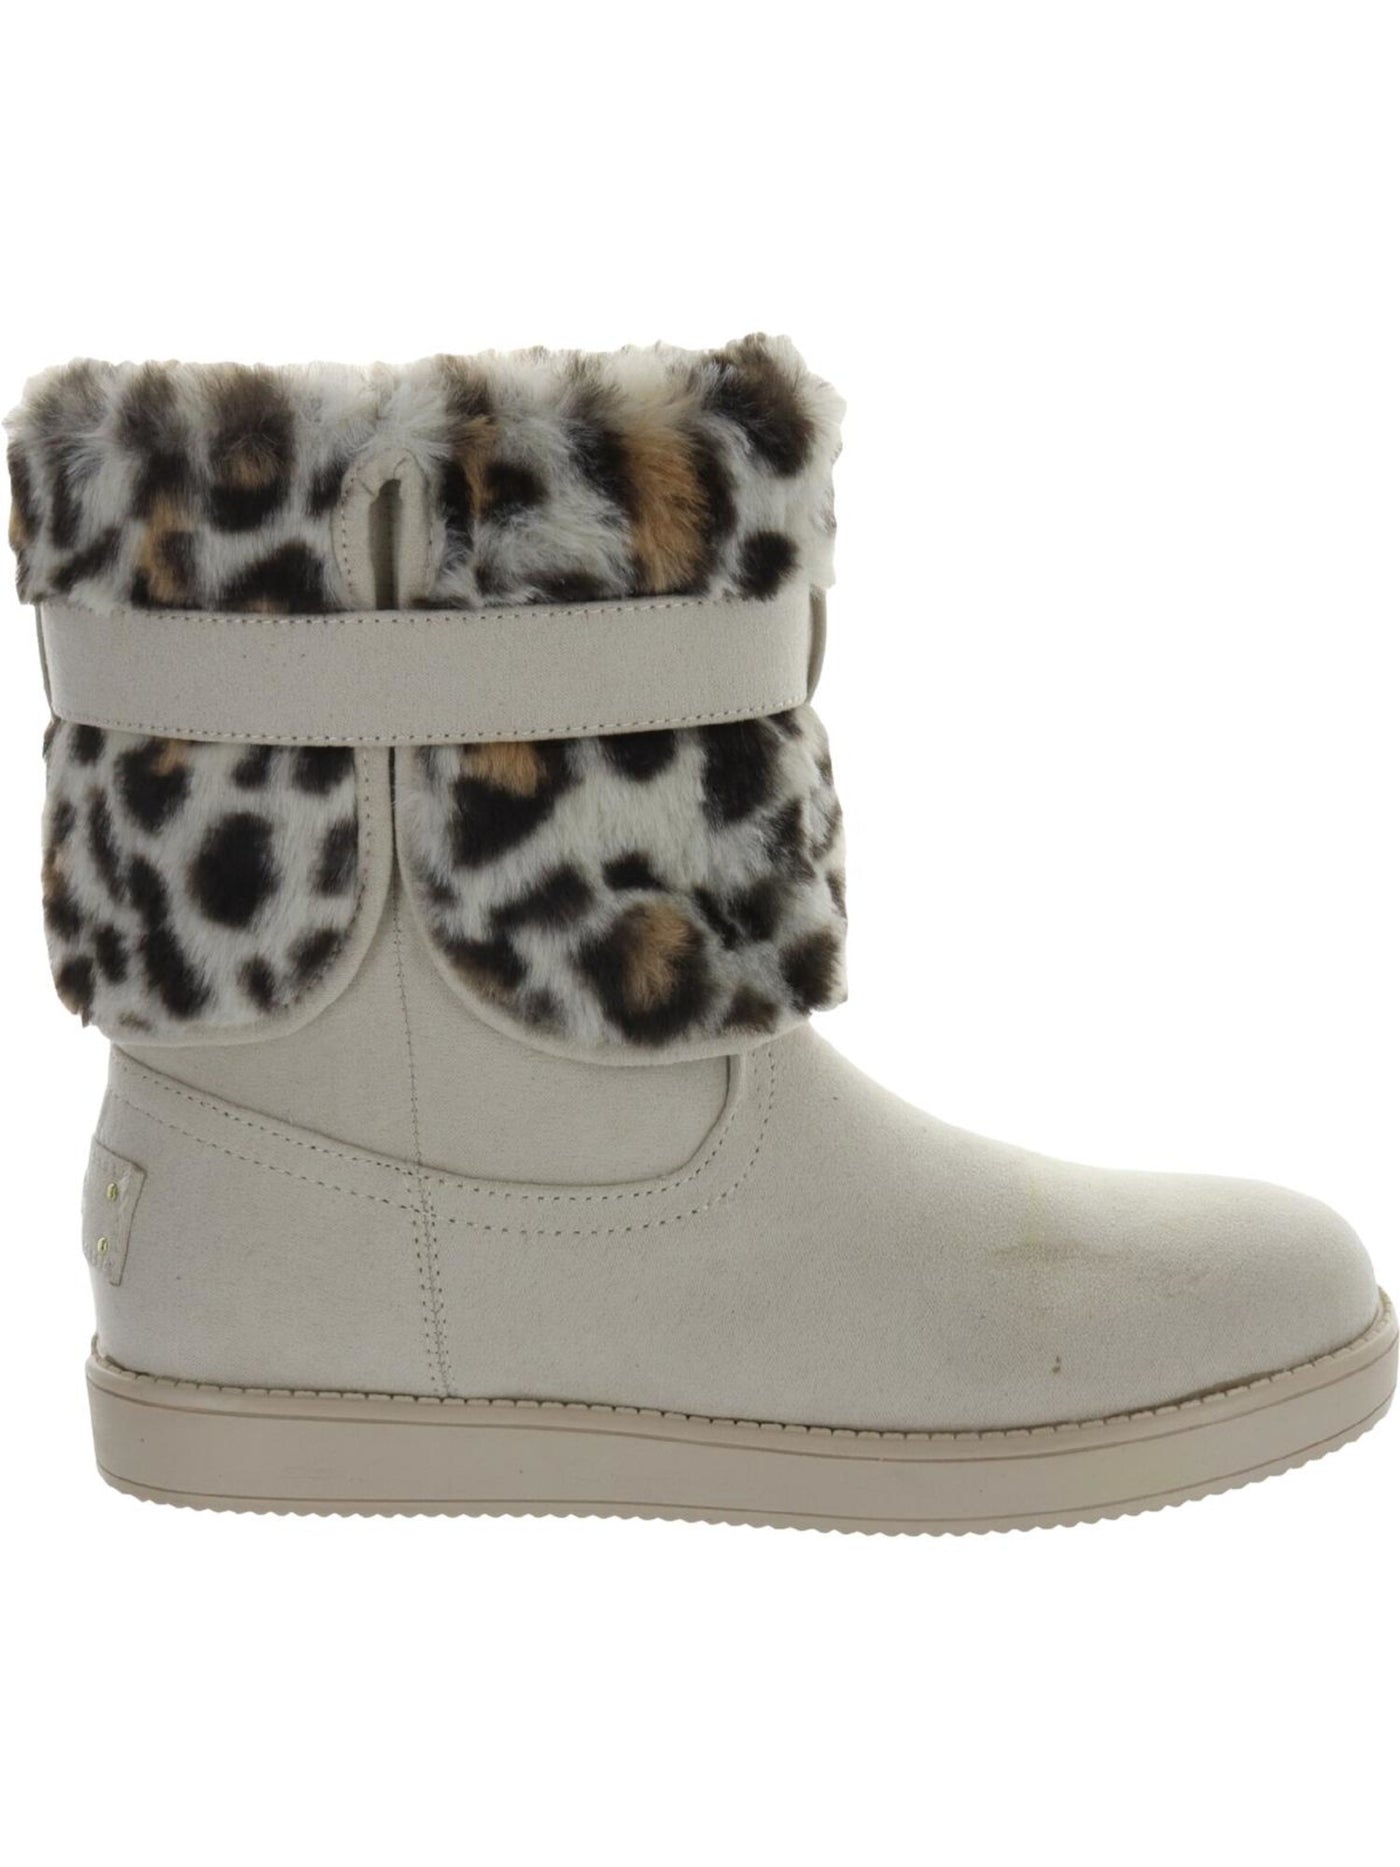 GBG LOS ANGELES Womens Beige Animal Print Buckle Accent Cushioned Adlea Round Toe Snow Boots 5